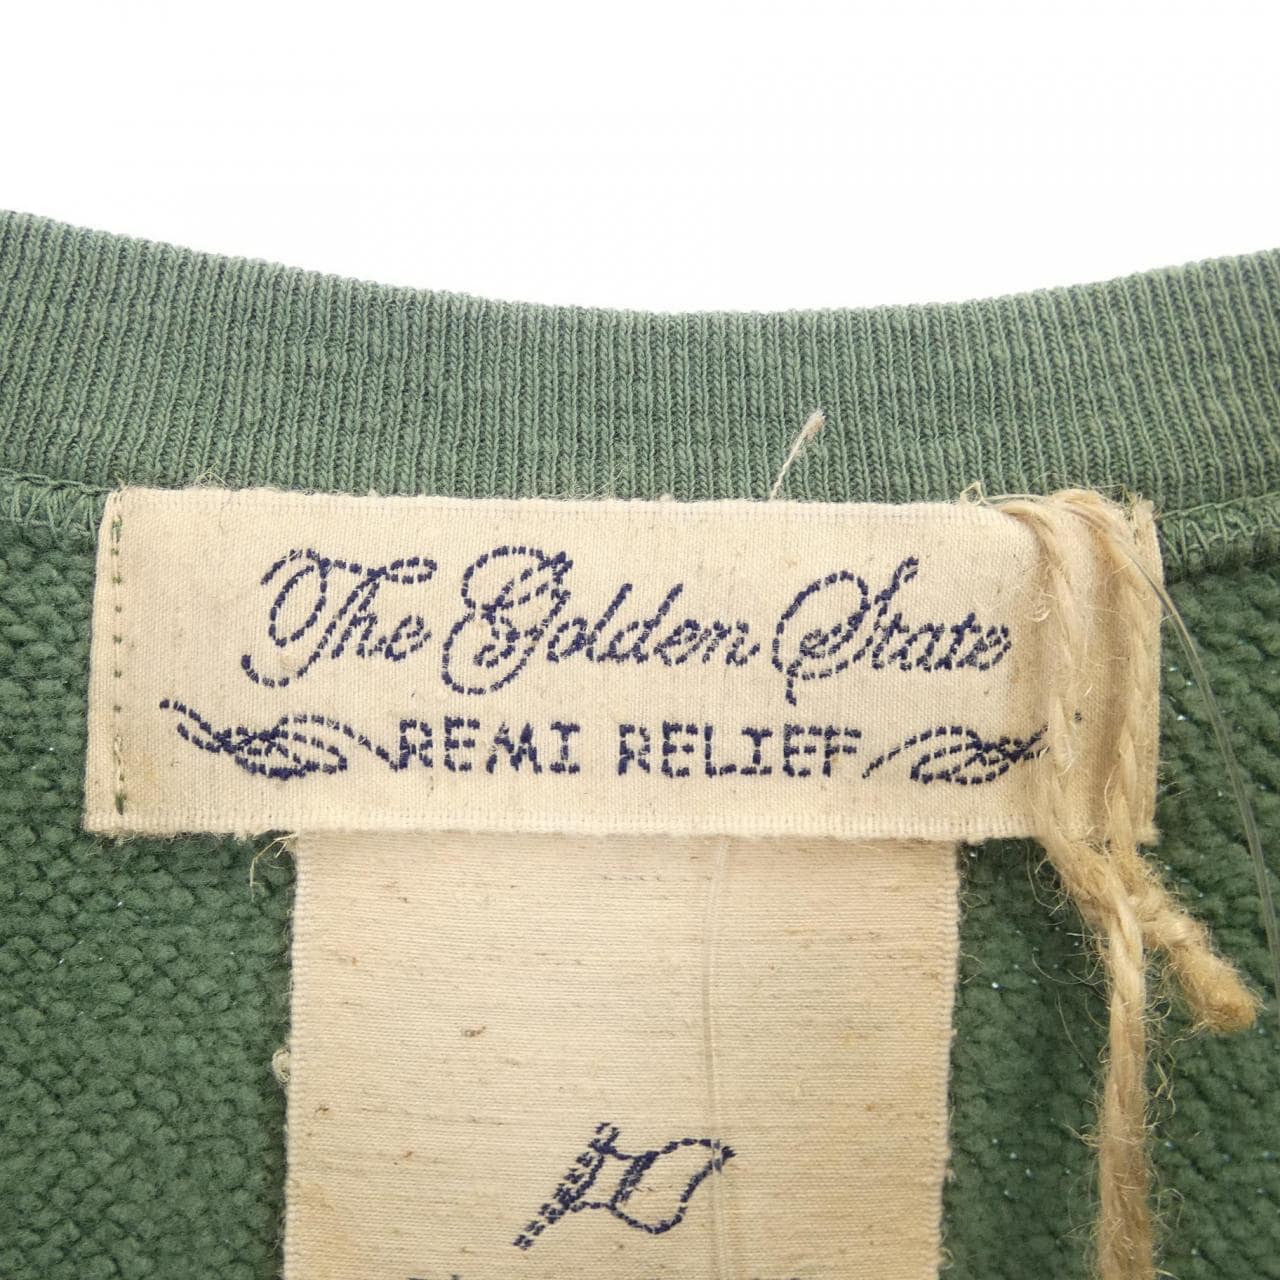 Remi relief REMI RELIEF top